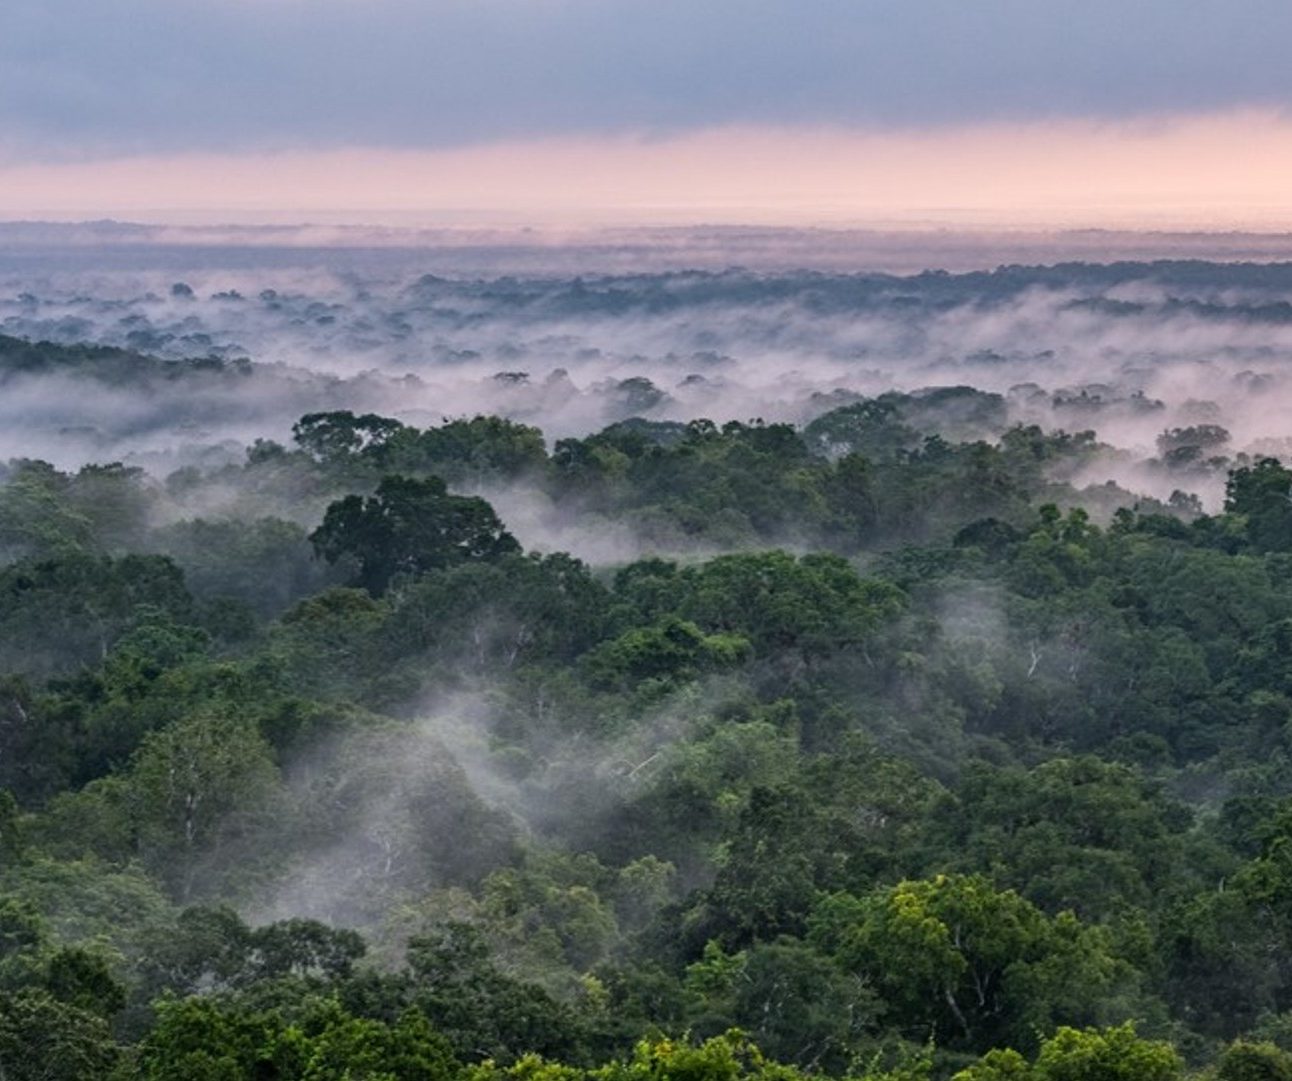 A panoramic view of a rainforest covered with mist